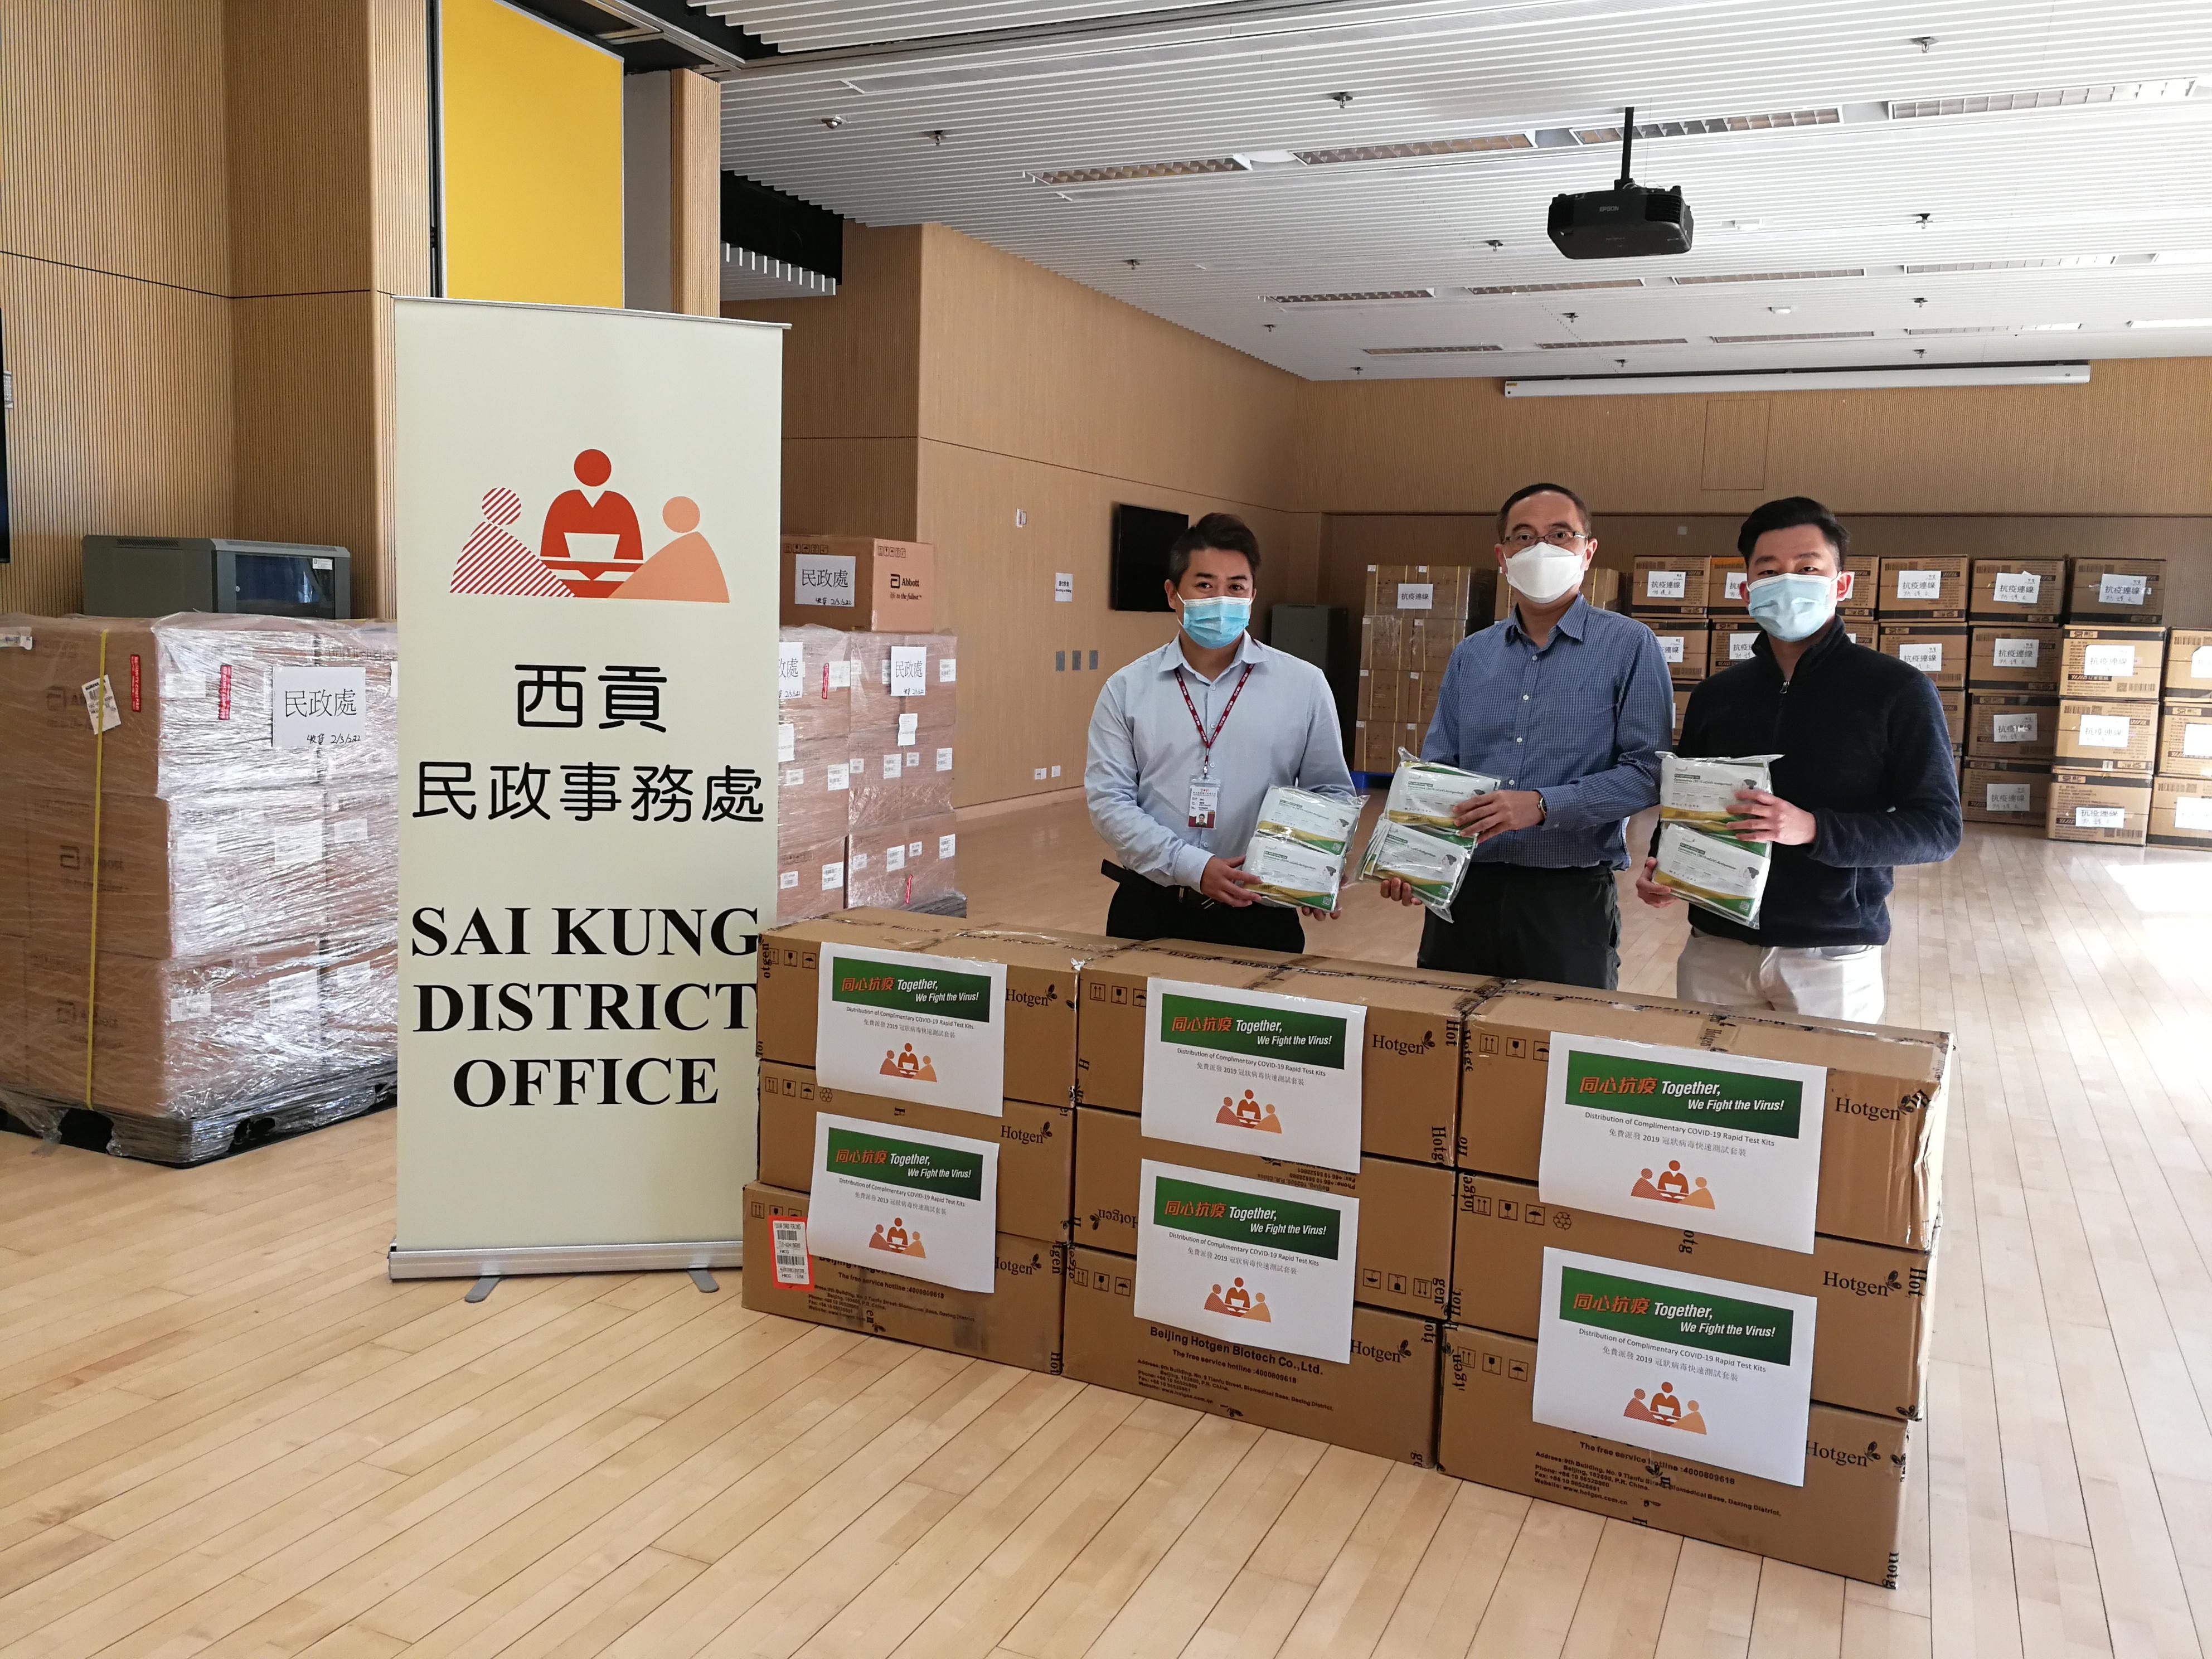 The Sai Kung District Office today (March 9) distributed COVID-19 rapid test kits to households, cleansing workers and property management staff living and working in King Lam Estate for voluntary testing through the property management company.